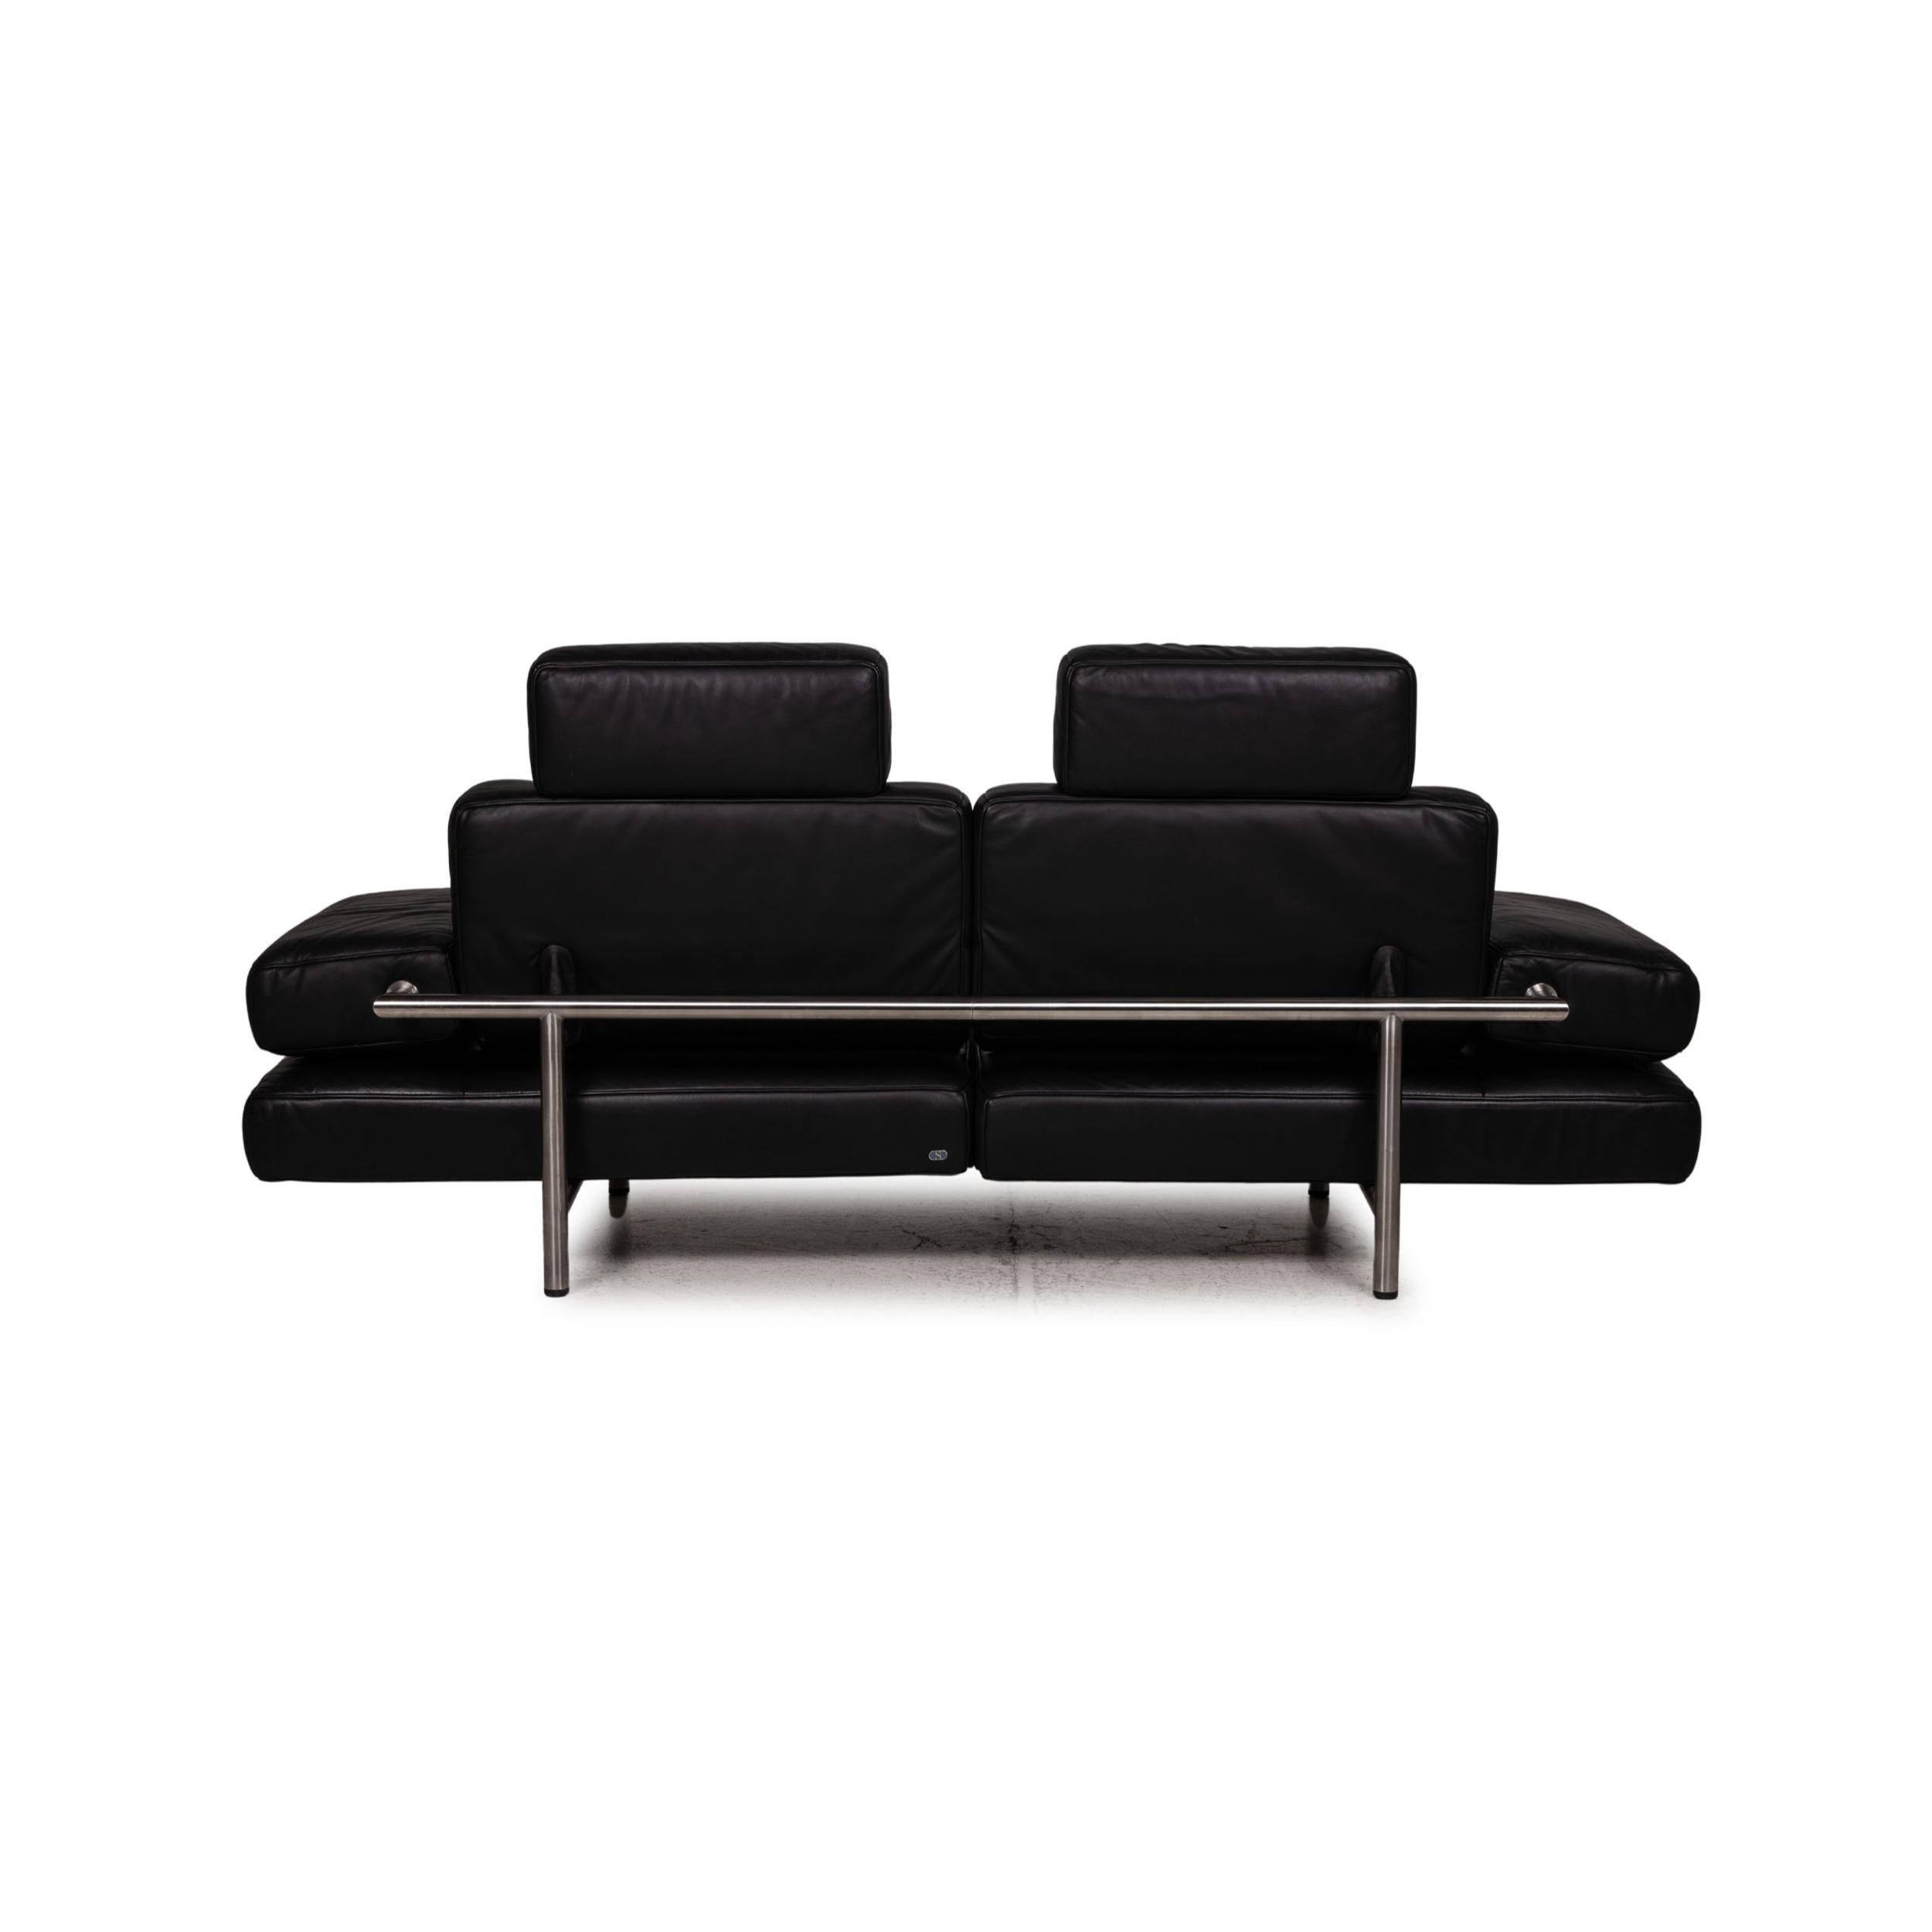 De Sede DS 460 Leather Sofa Black Three-Seater Relaxation Function Couch For Sale 5